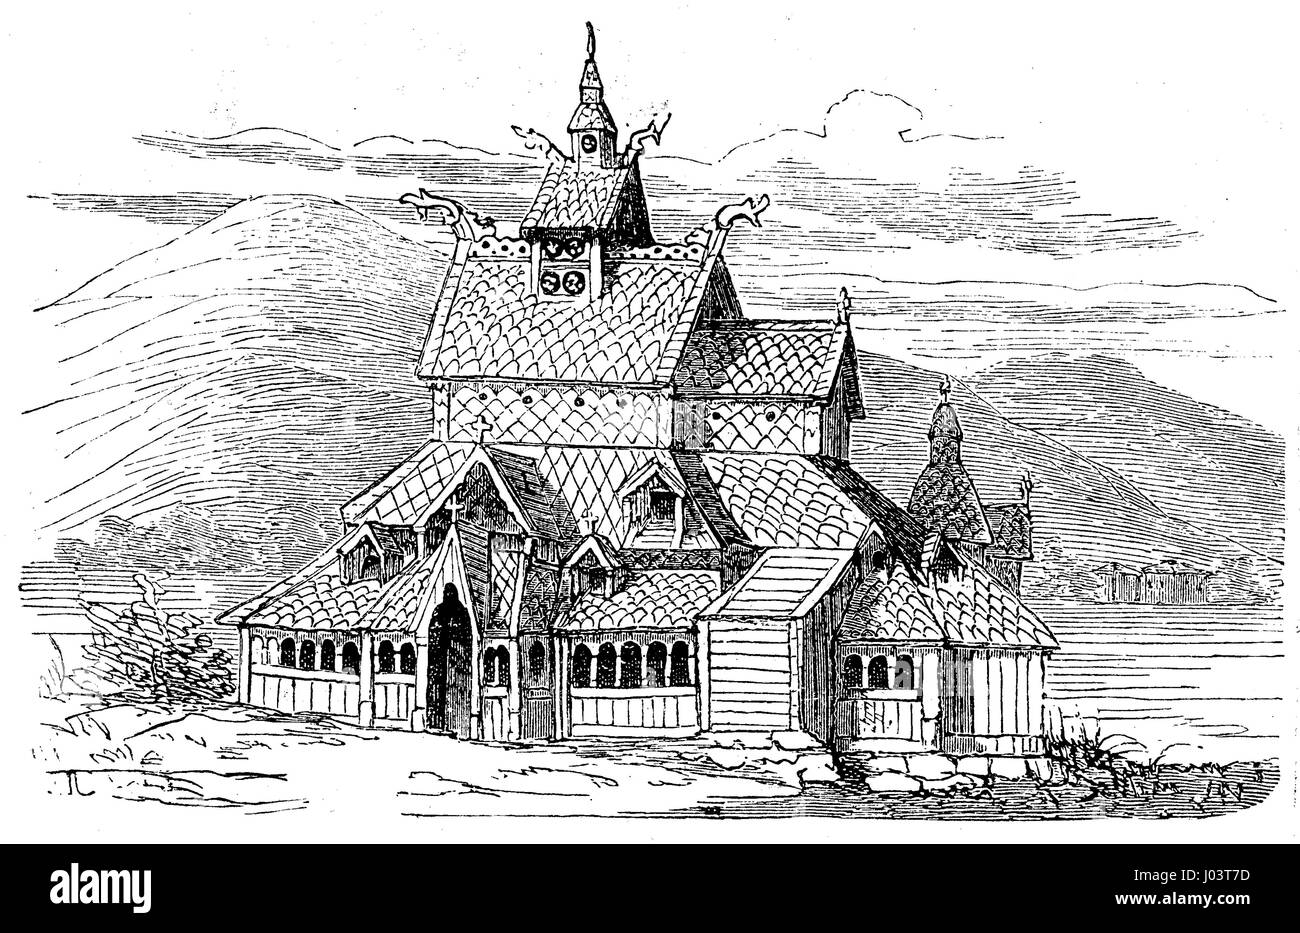 vintage engraving of the medieval wooden Christian church of Borgund in Norway also named Borgund stave church, completed in XII century on a basilica shape with steeply pitched roofs covered by shingles Stock Photo